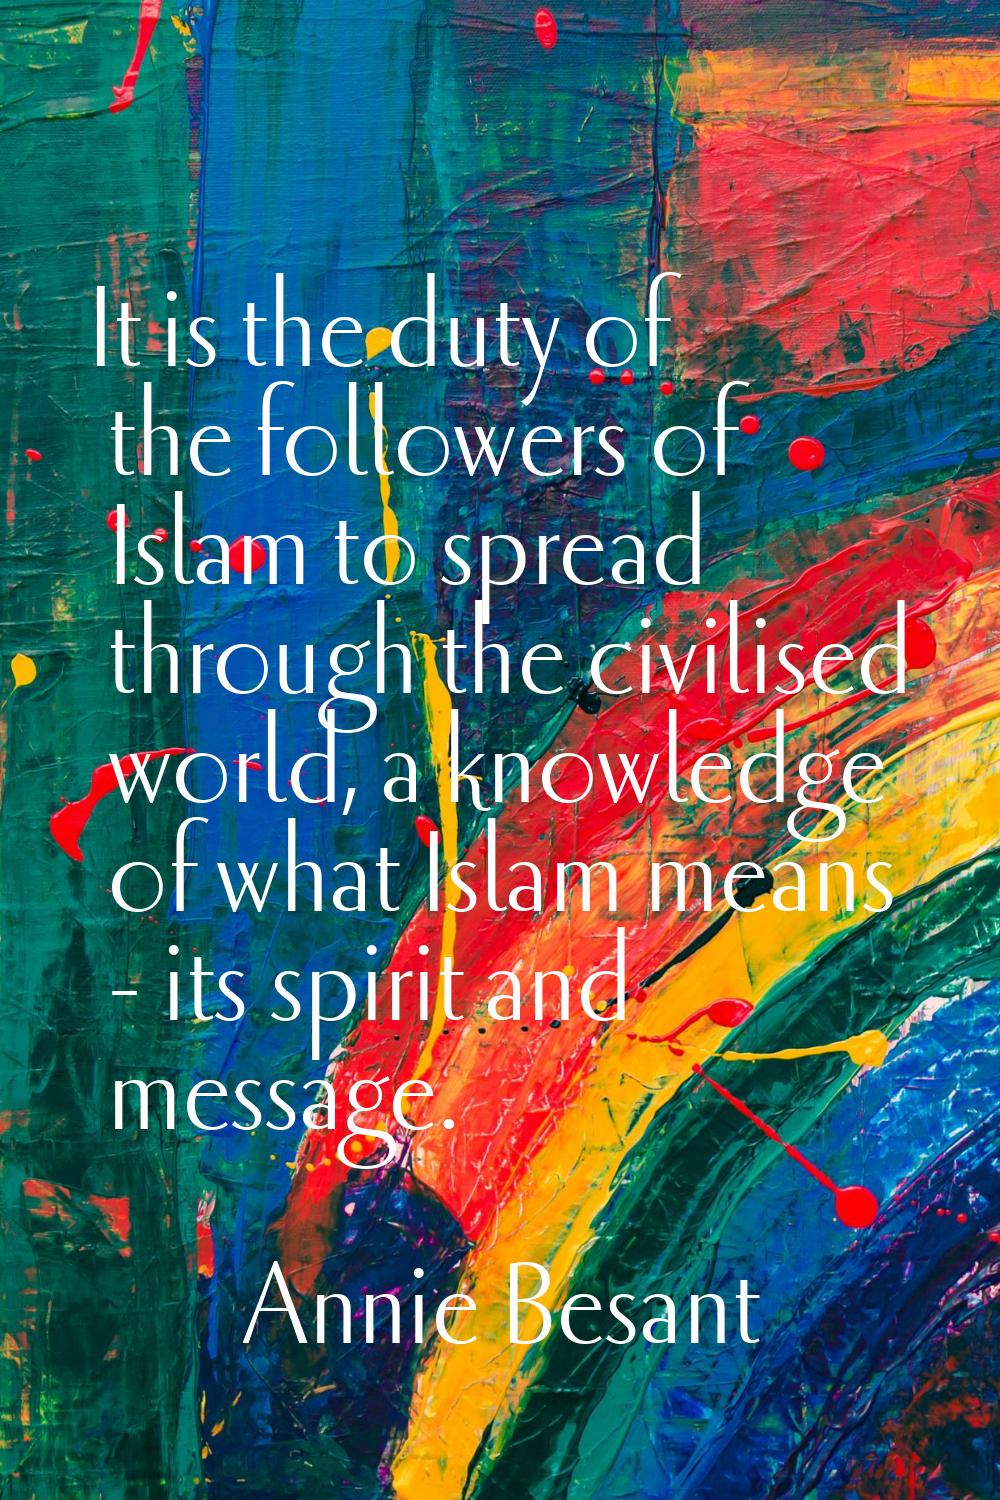 It is the duty of the followers of Islam to spread through the civilised world, a knowledge of what